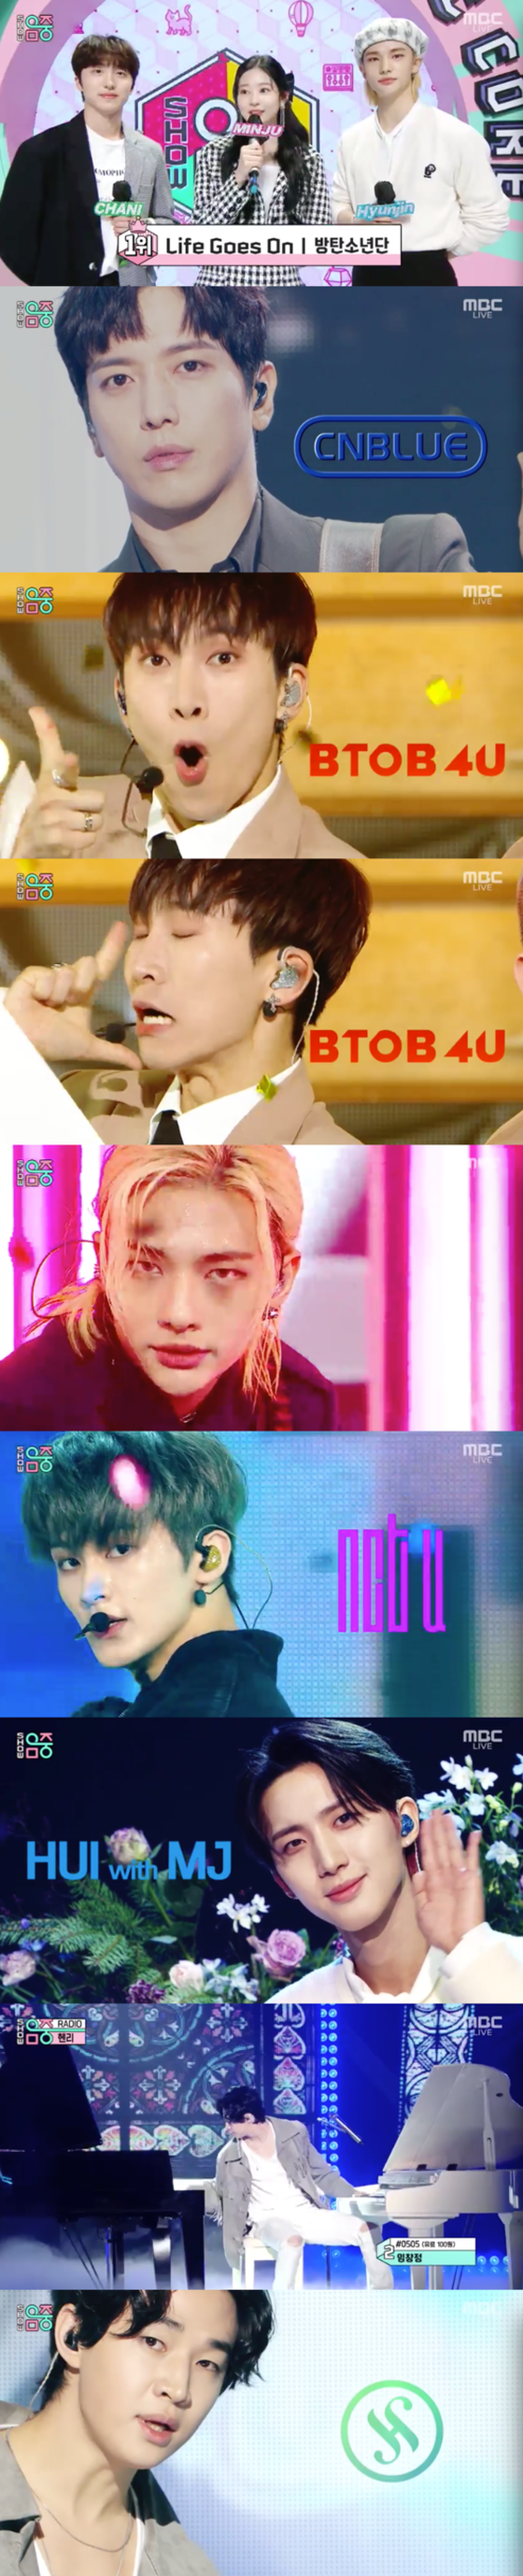 "BTS", "MUSICCORE" 1st place ... "CNBLUE" comeback & "NCT U", "aespa" and other SM singers lead